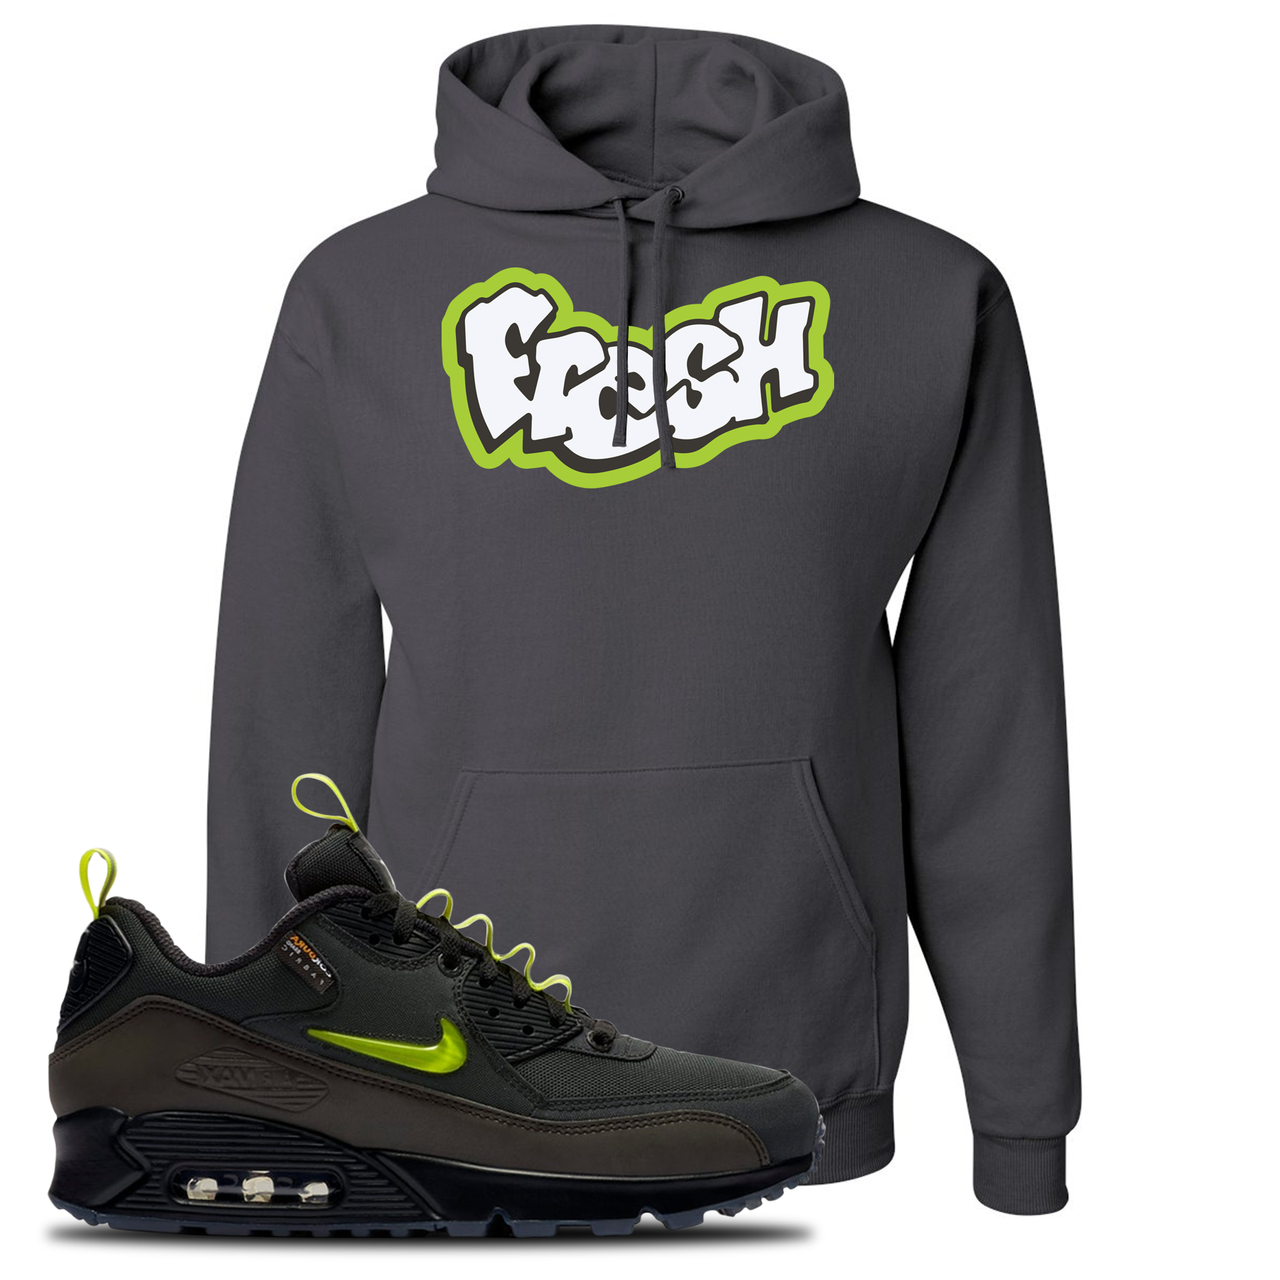 The Basement X Air Max 90 Manchester Fresh Charcoal Gray Sneaker Hook Up Pullover Hoodie